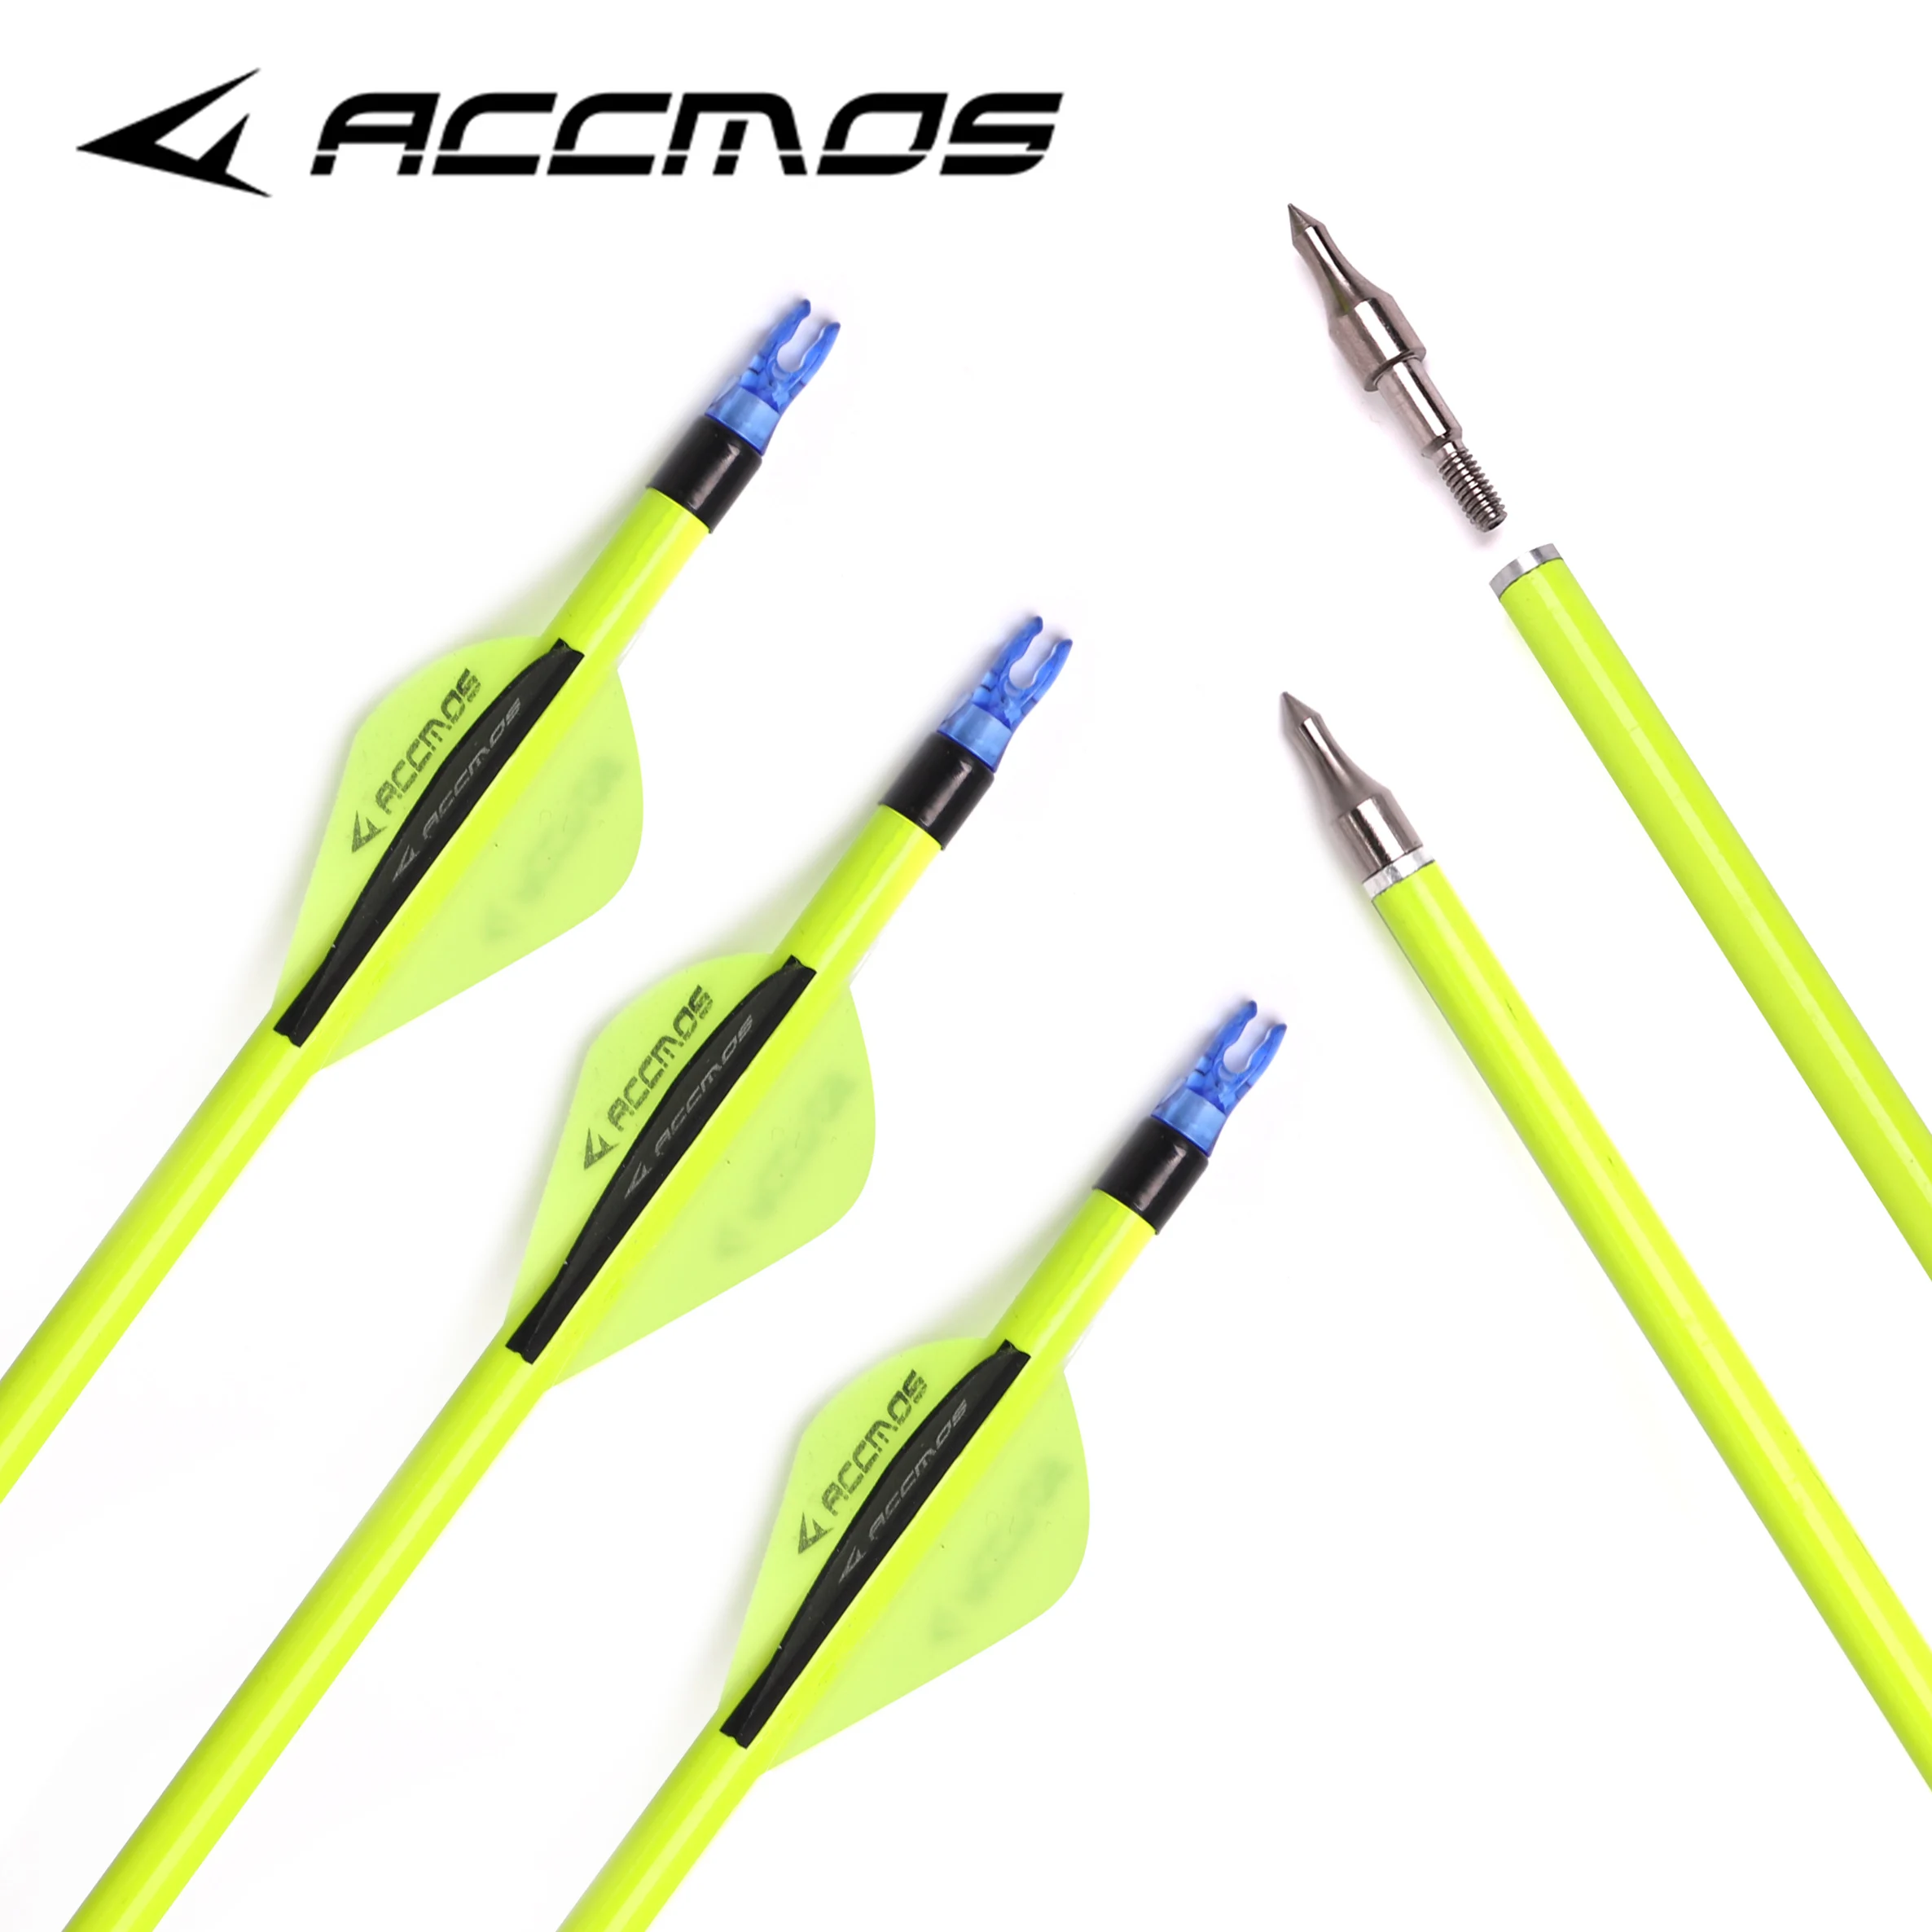 

12pc ID6.2 Archery Spine 300-600 Mixed Carbon Arrow for Recurve/Compound Bows Archery Hunting